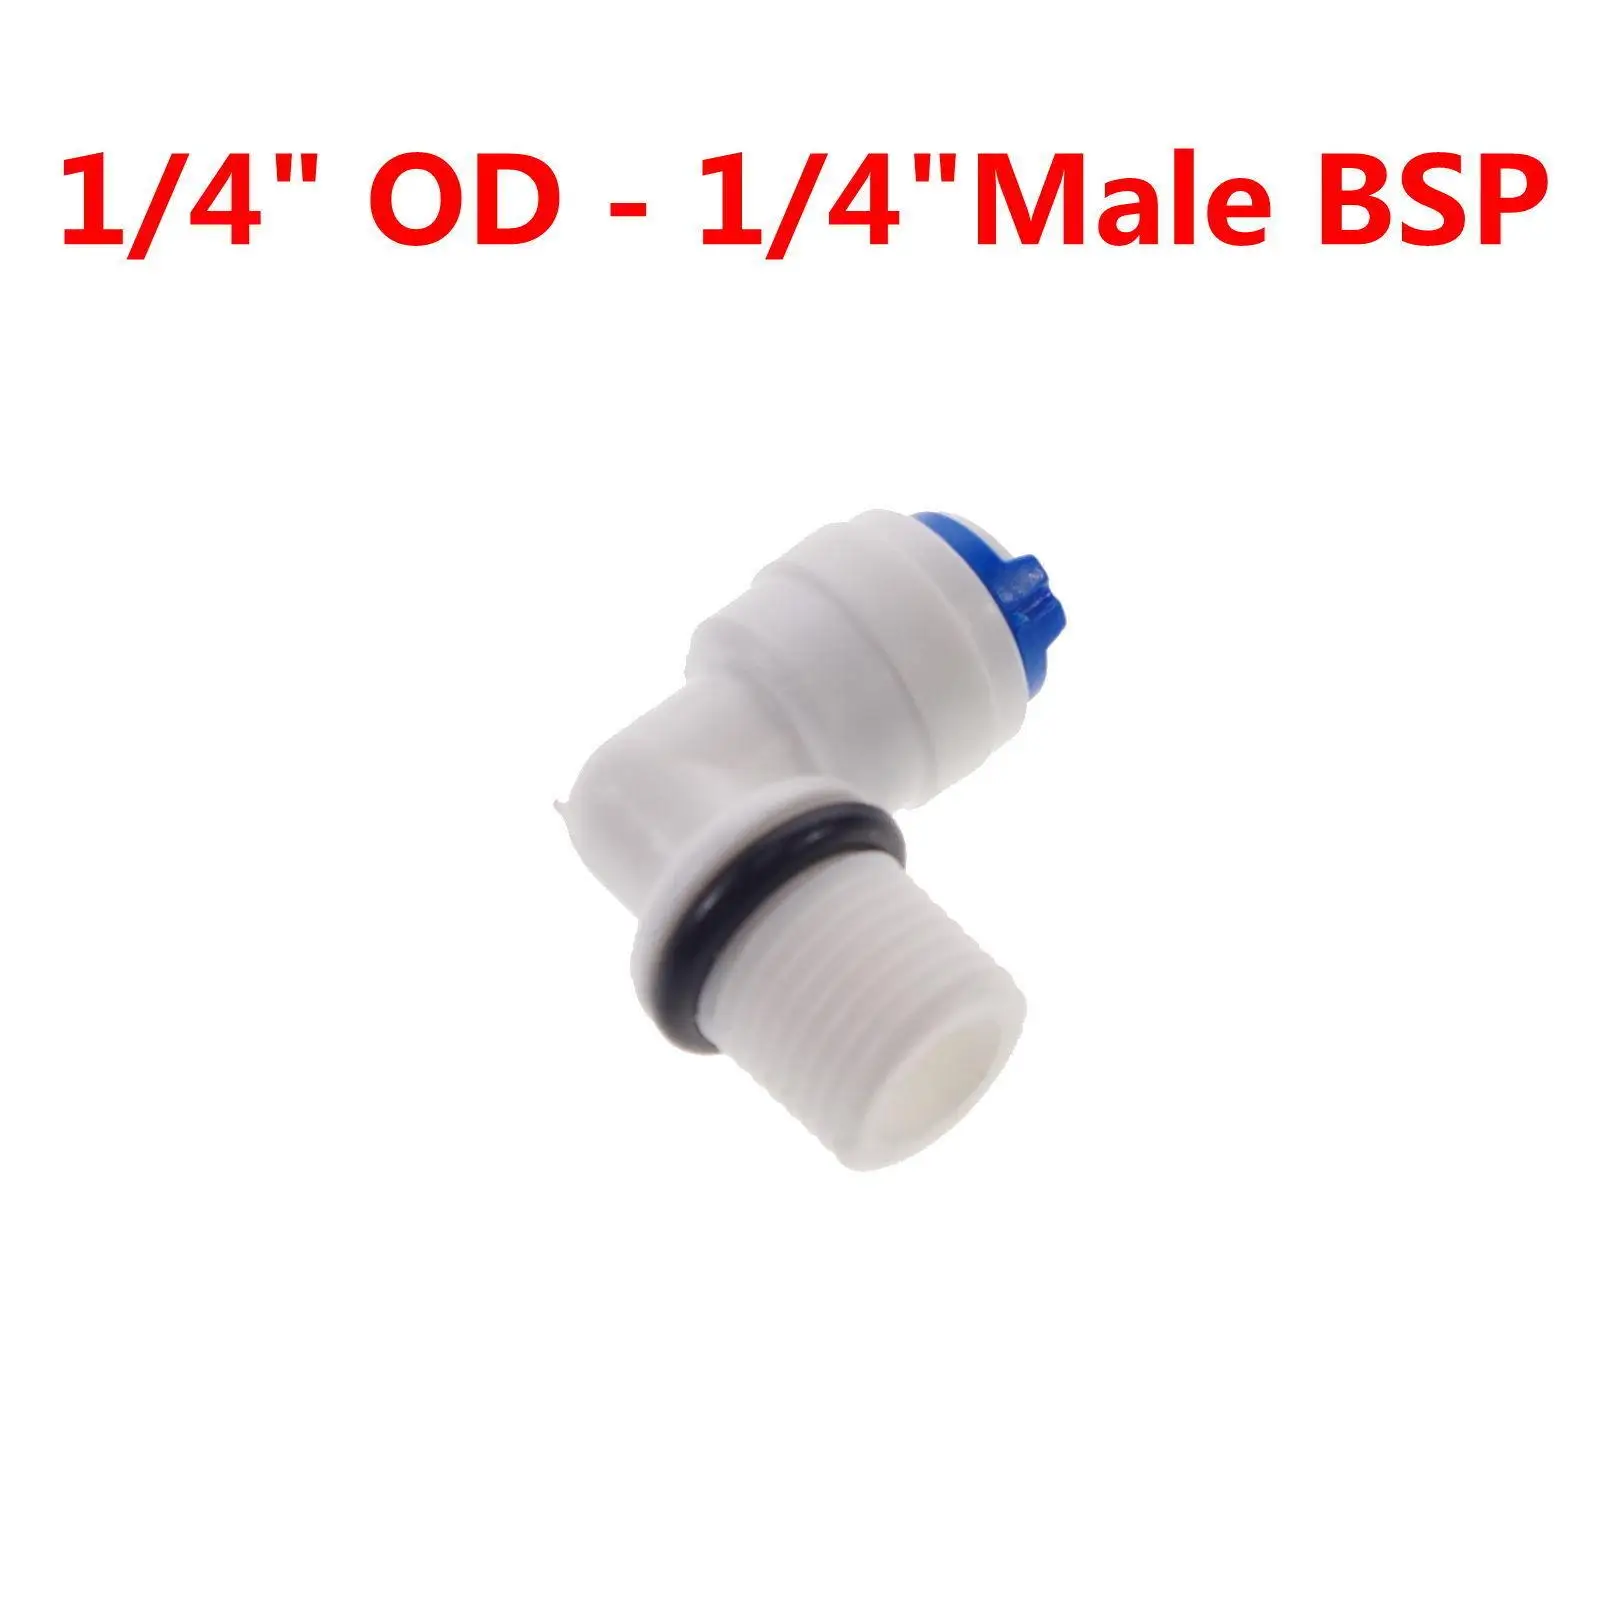 1/4" 3/8" O/D Quickfit Elbow Male BSP Pipe Fitting RO Water Reverse Osmosis 5 